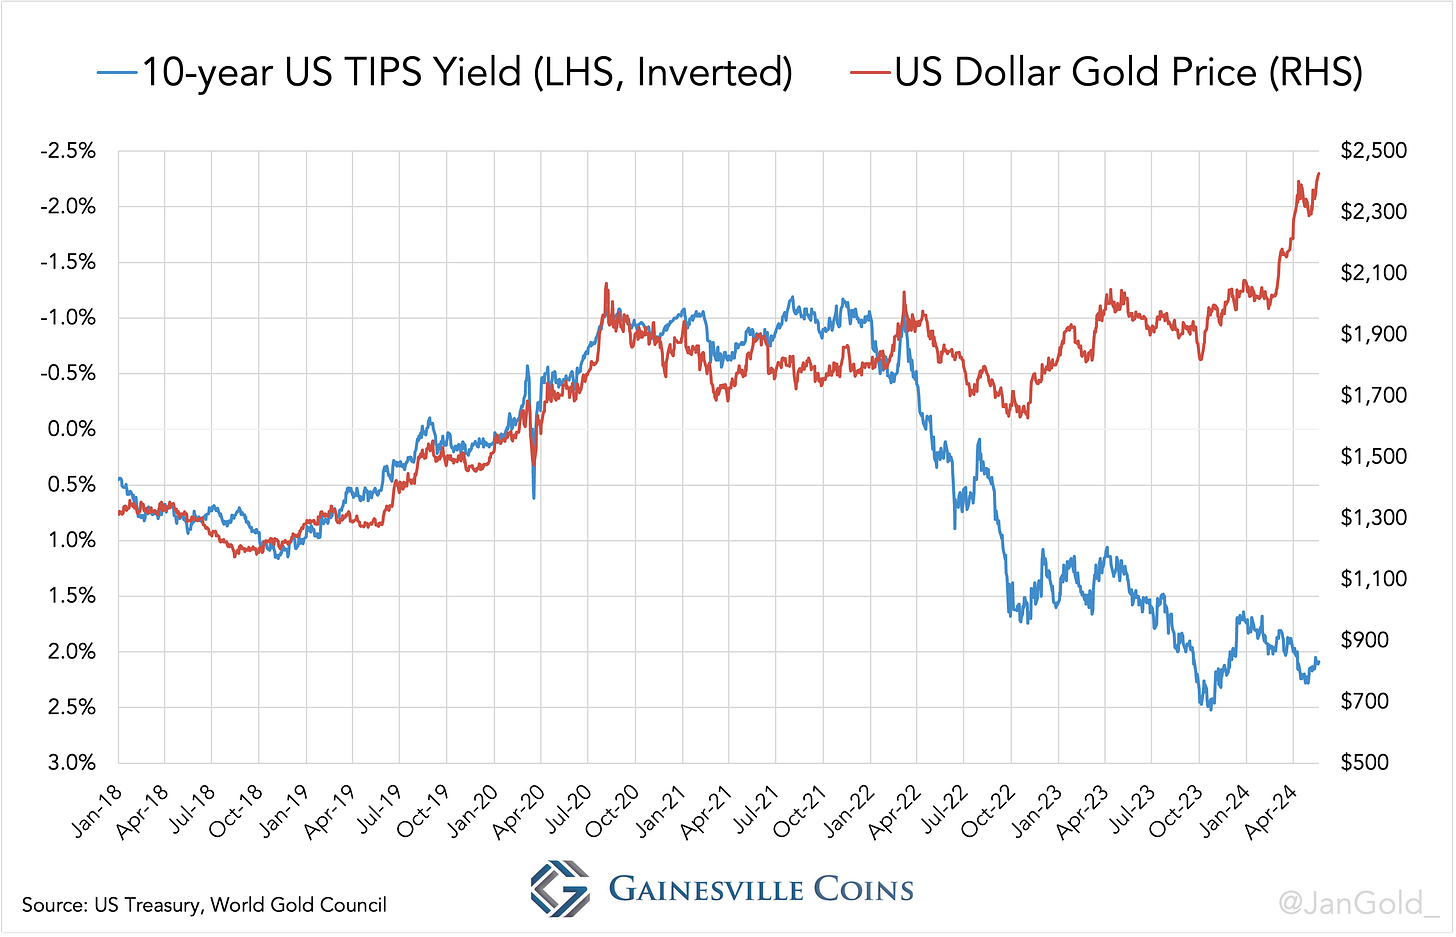 Gold price and real yields